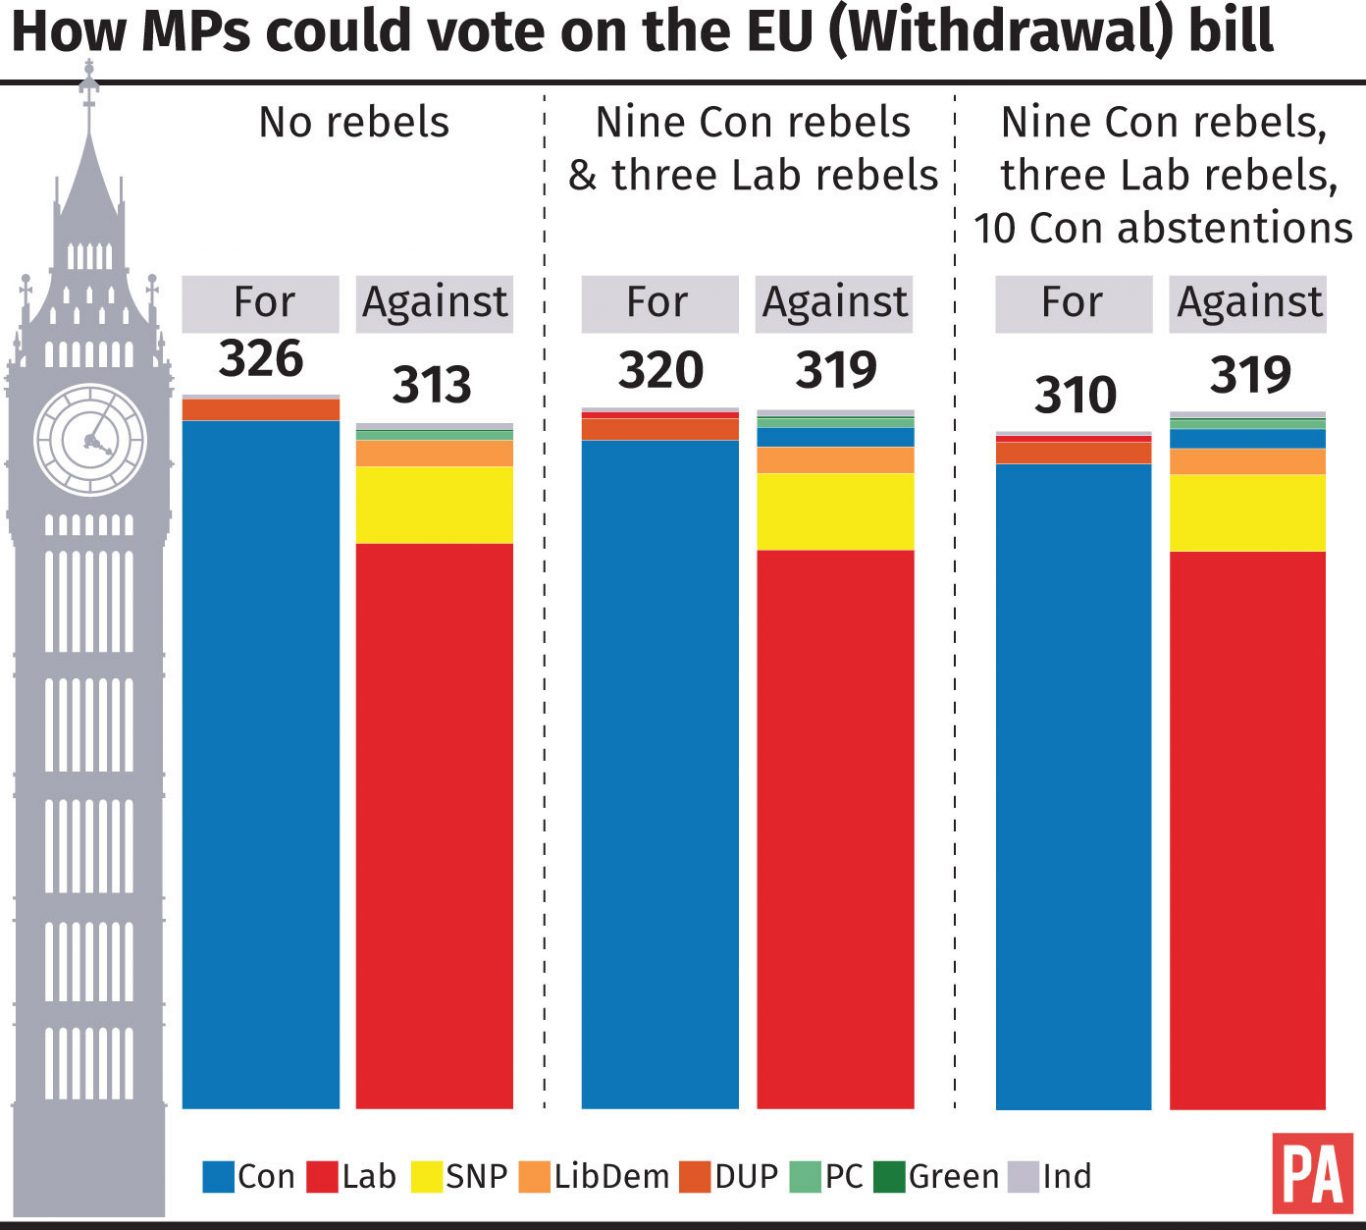 How MPs could vote on the EU (withdrawal) bill